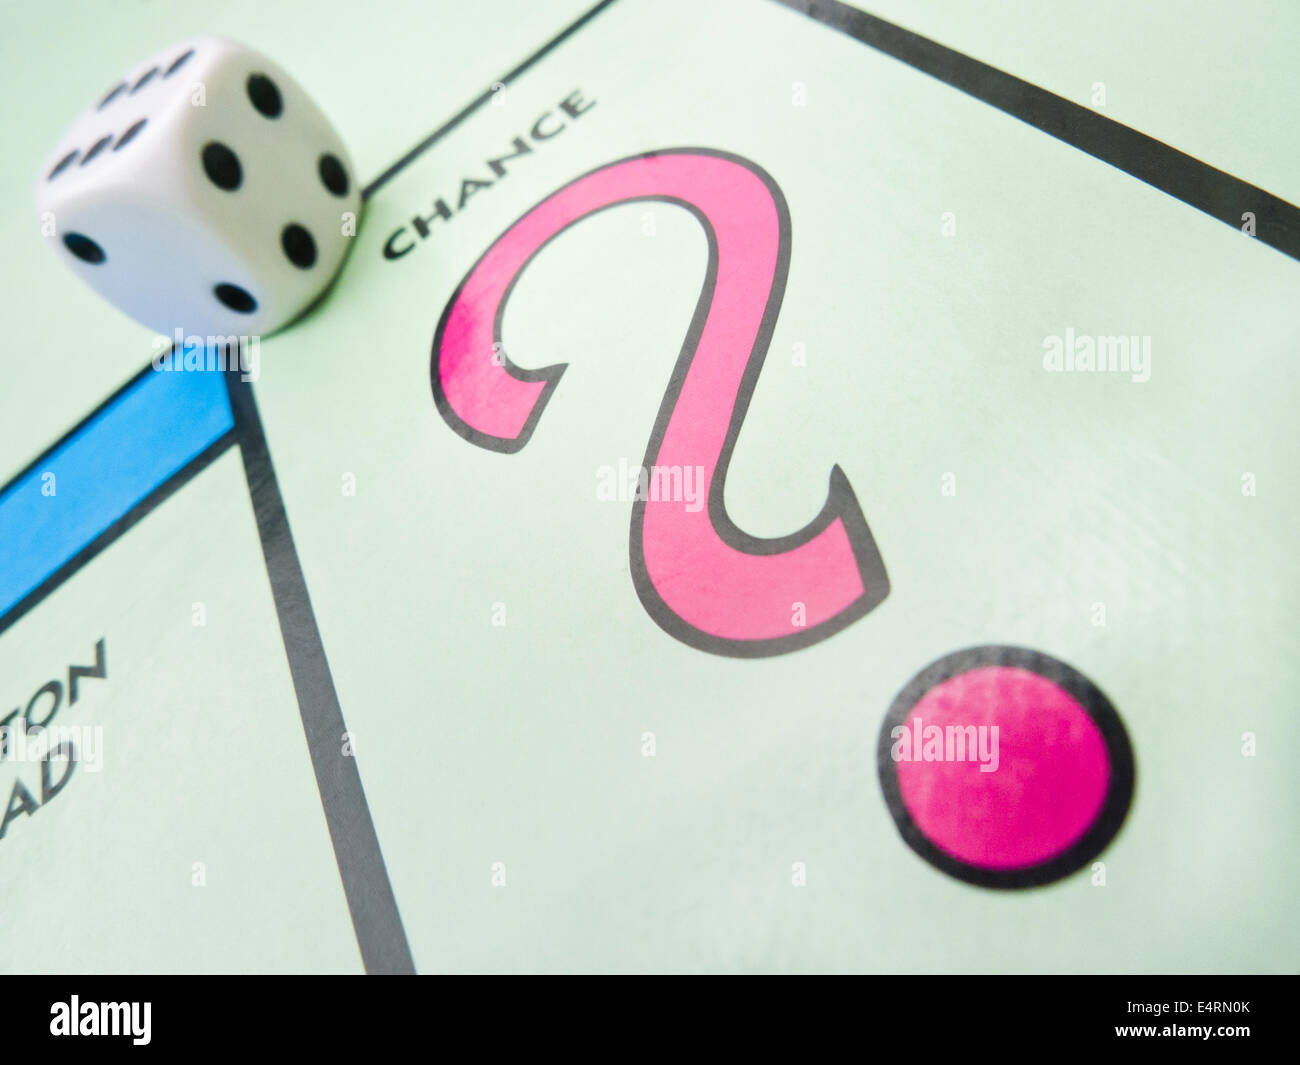 The 'CHANCE'  square on a monopoly board with a dice. Stock Photo